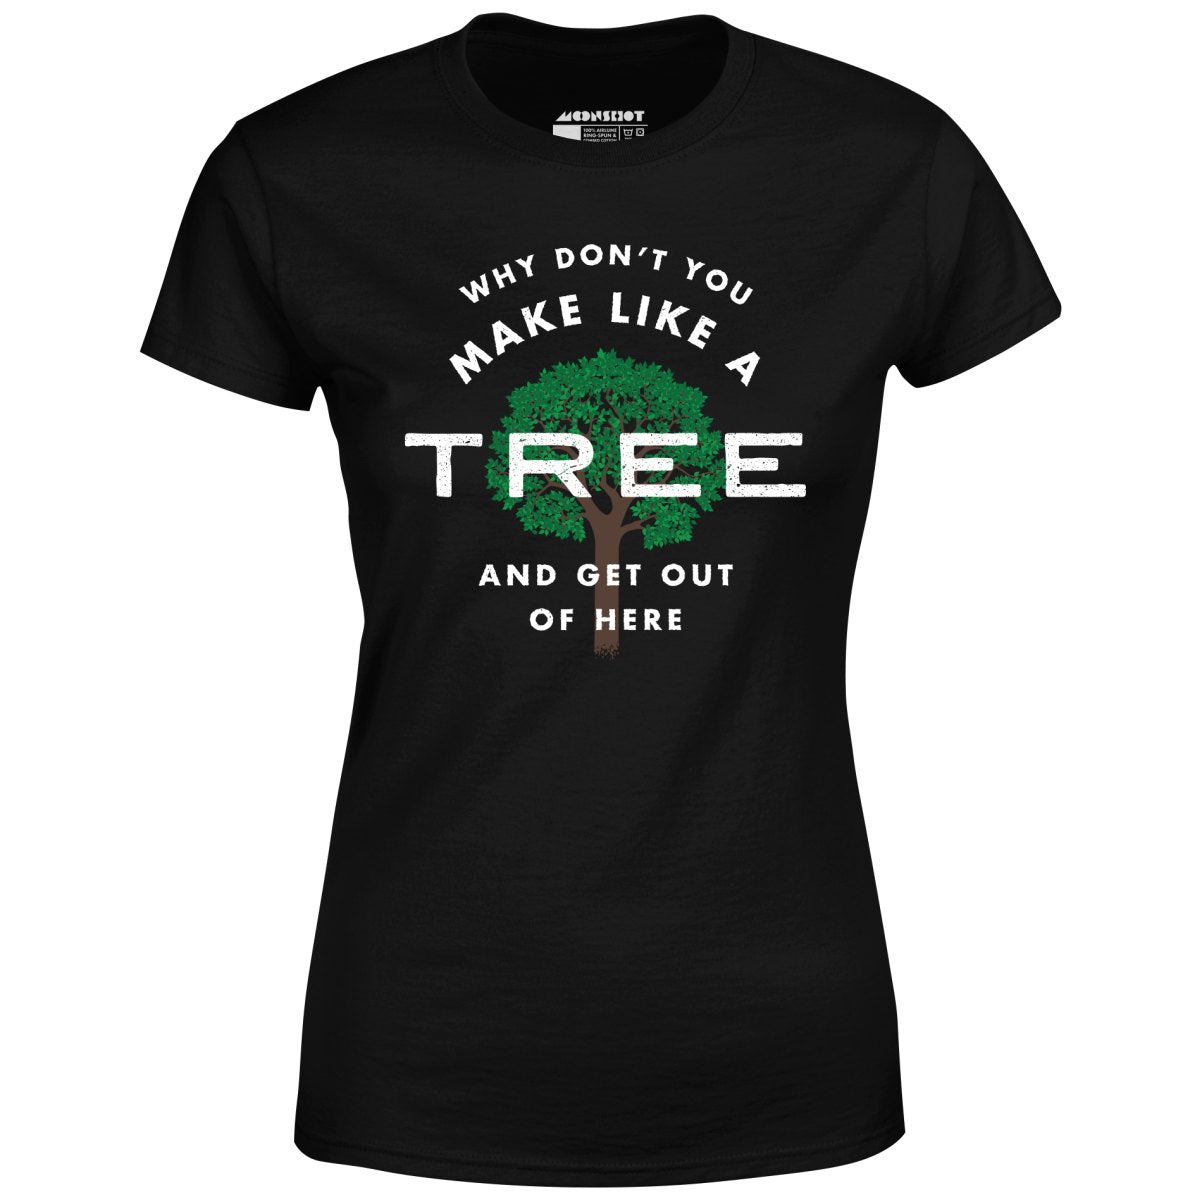 Why Don't You Make Like a Tree and Get Out of Here - Women's T-Shirt